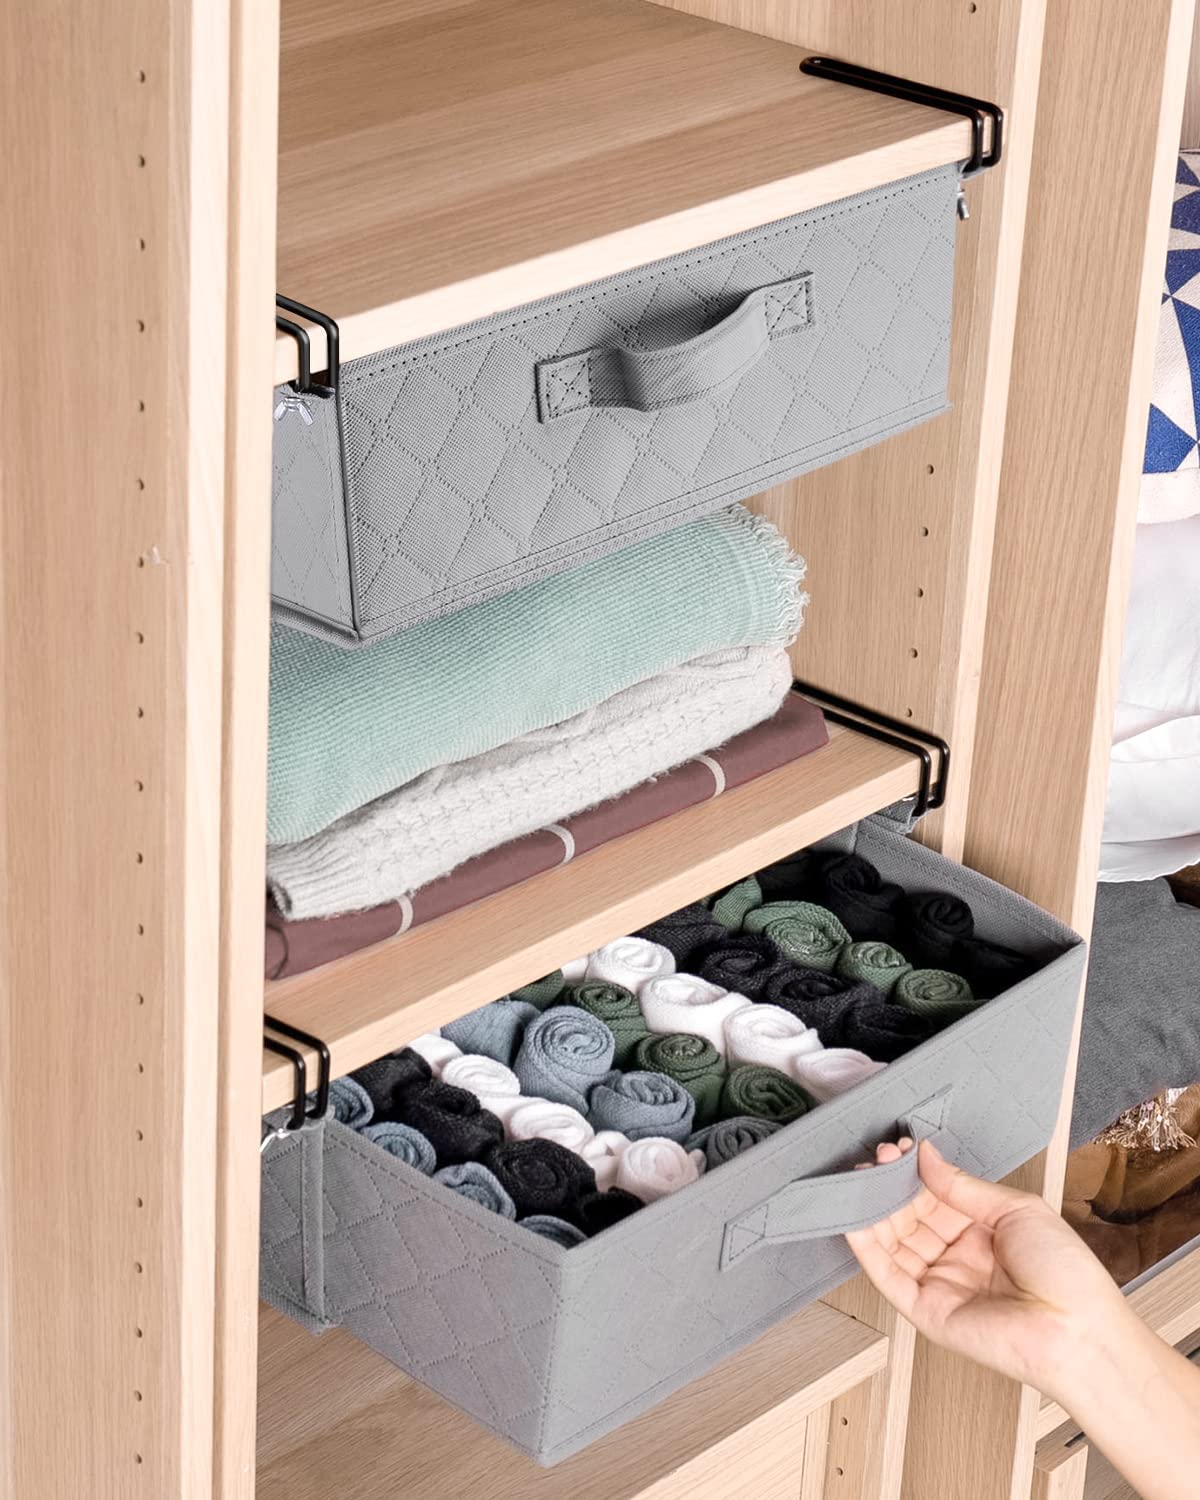 15 Clever Ways to Organize Underwear Without Using Drawers – All